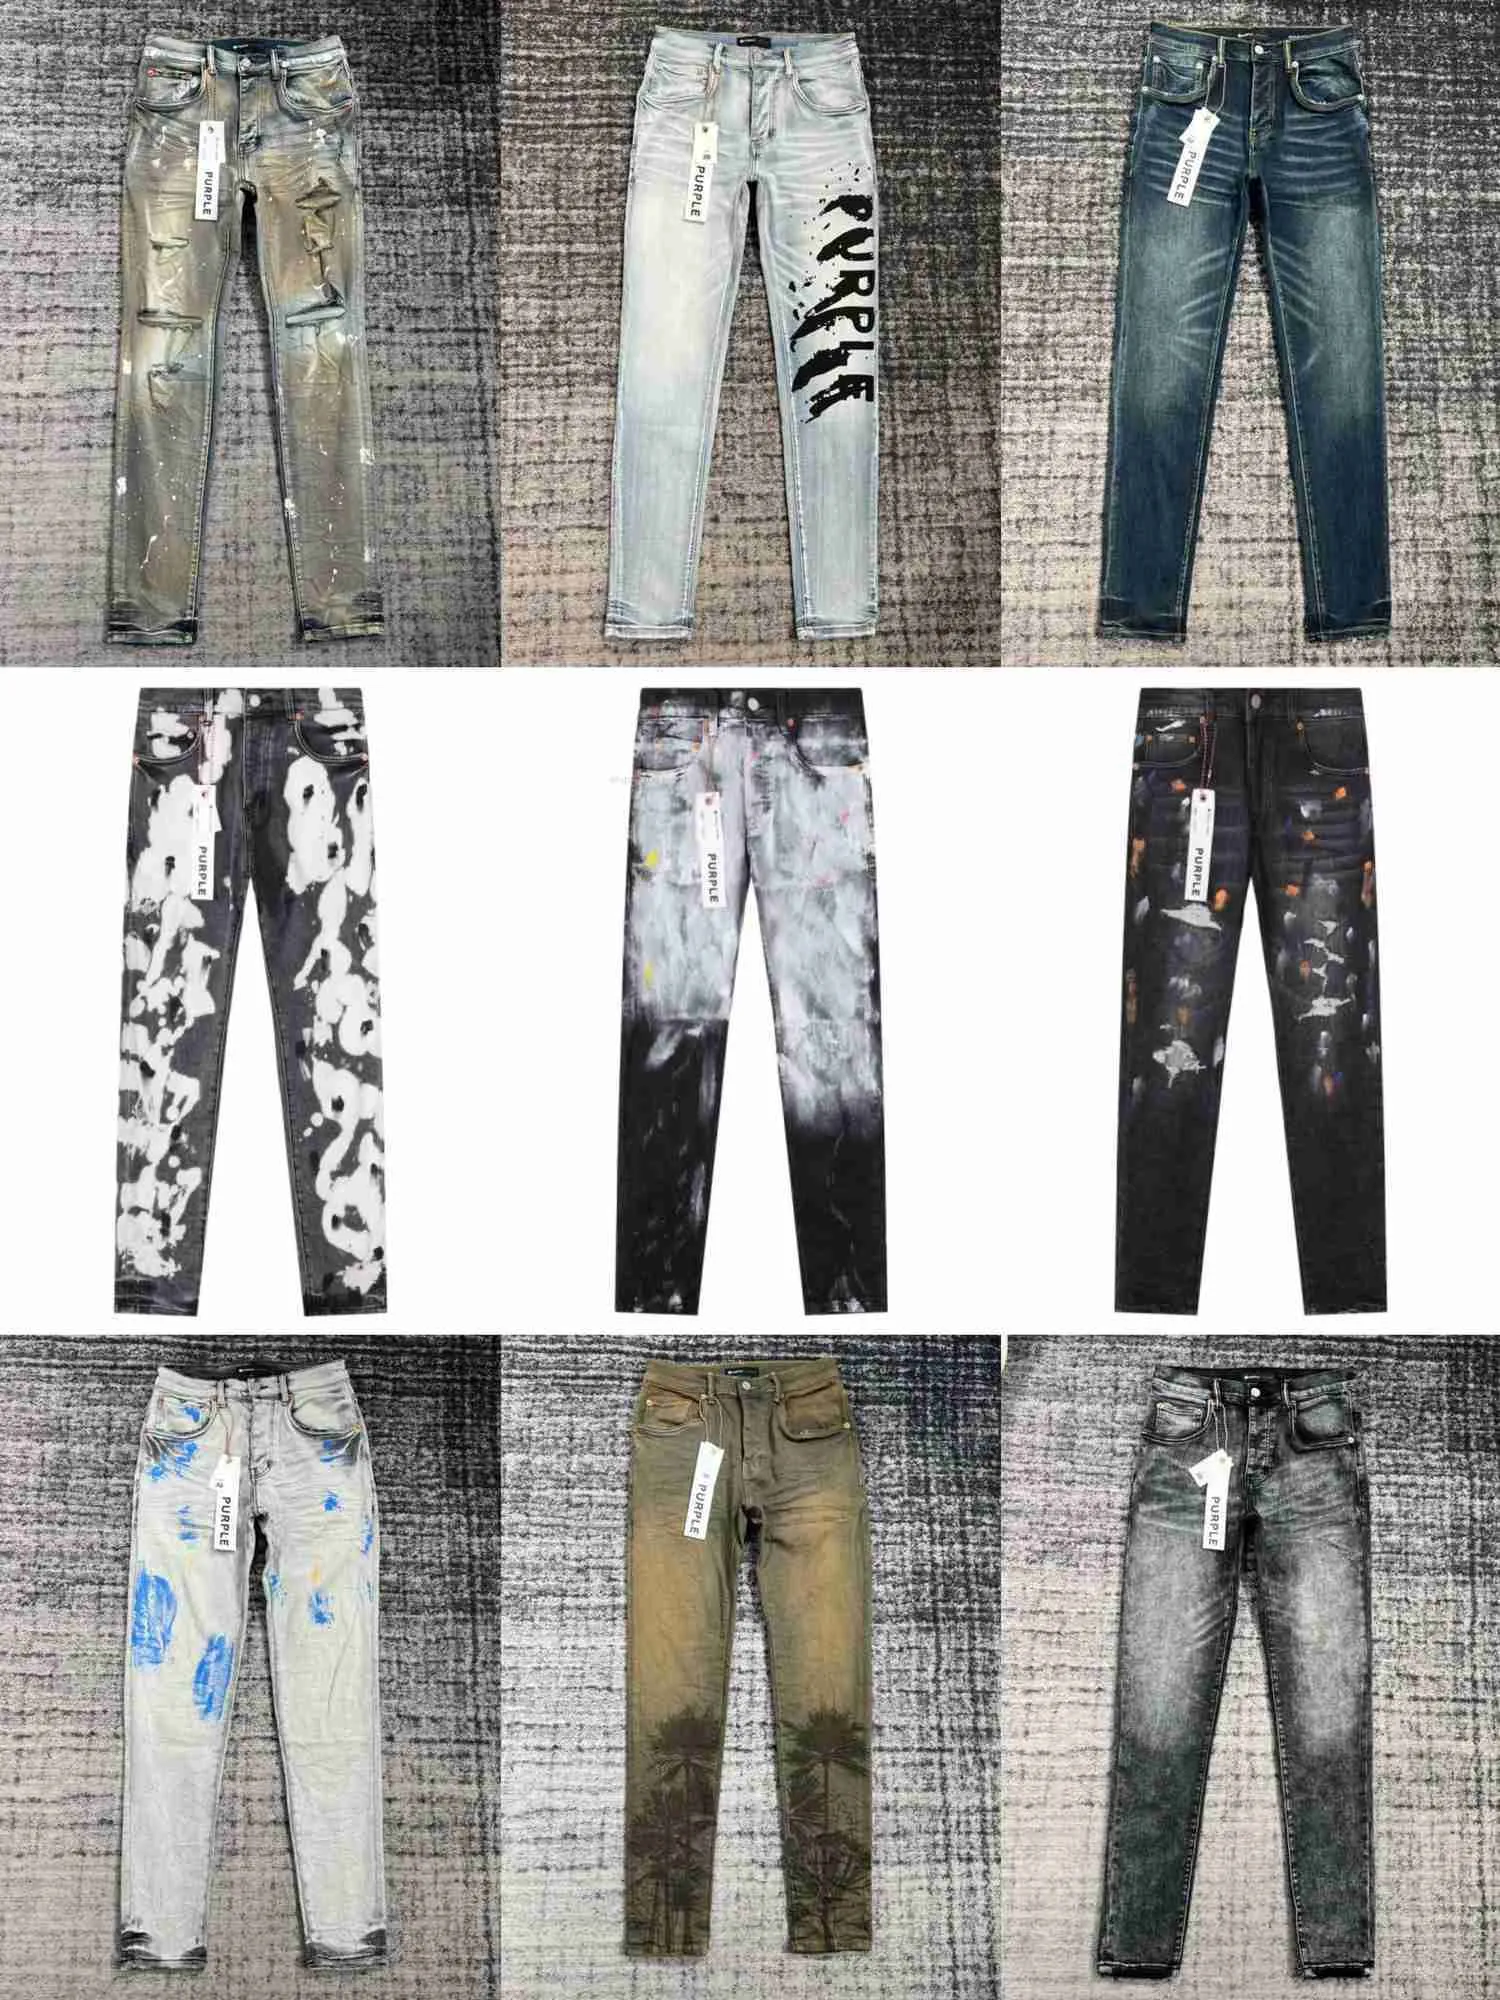 Pruple Mens Jeans Black Cargo Pants Designer Skinny Stickers Light Wash Ripped Motorcycle Rock Revival Joggers True Religions Casual sss